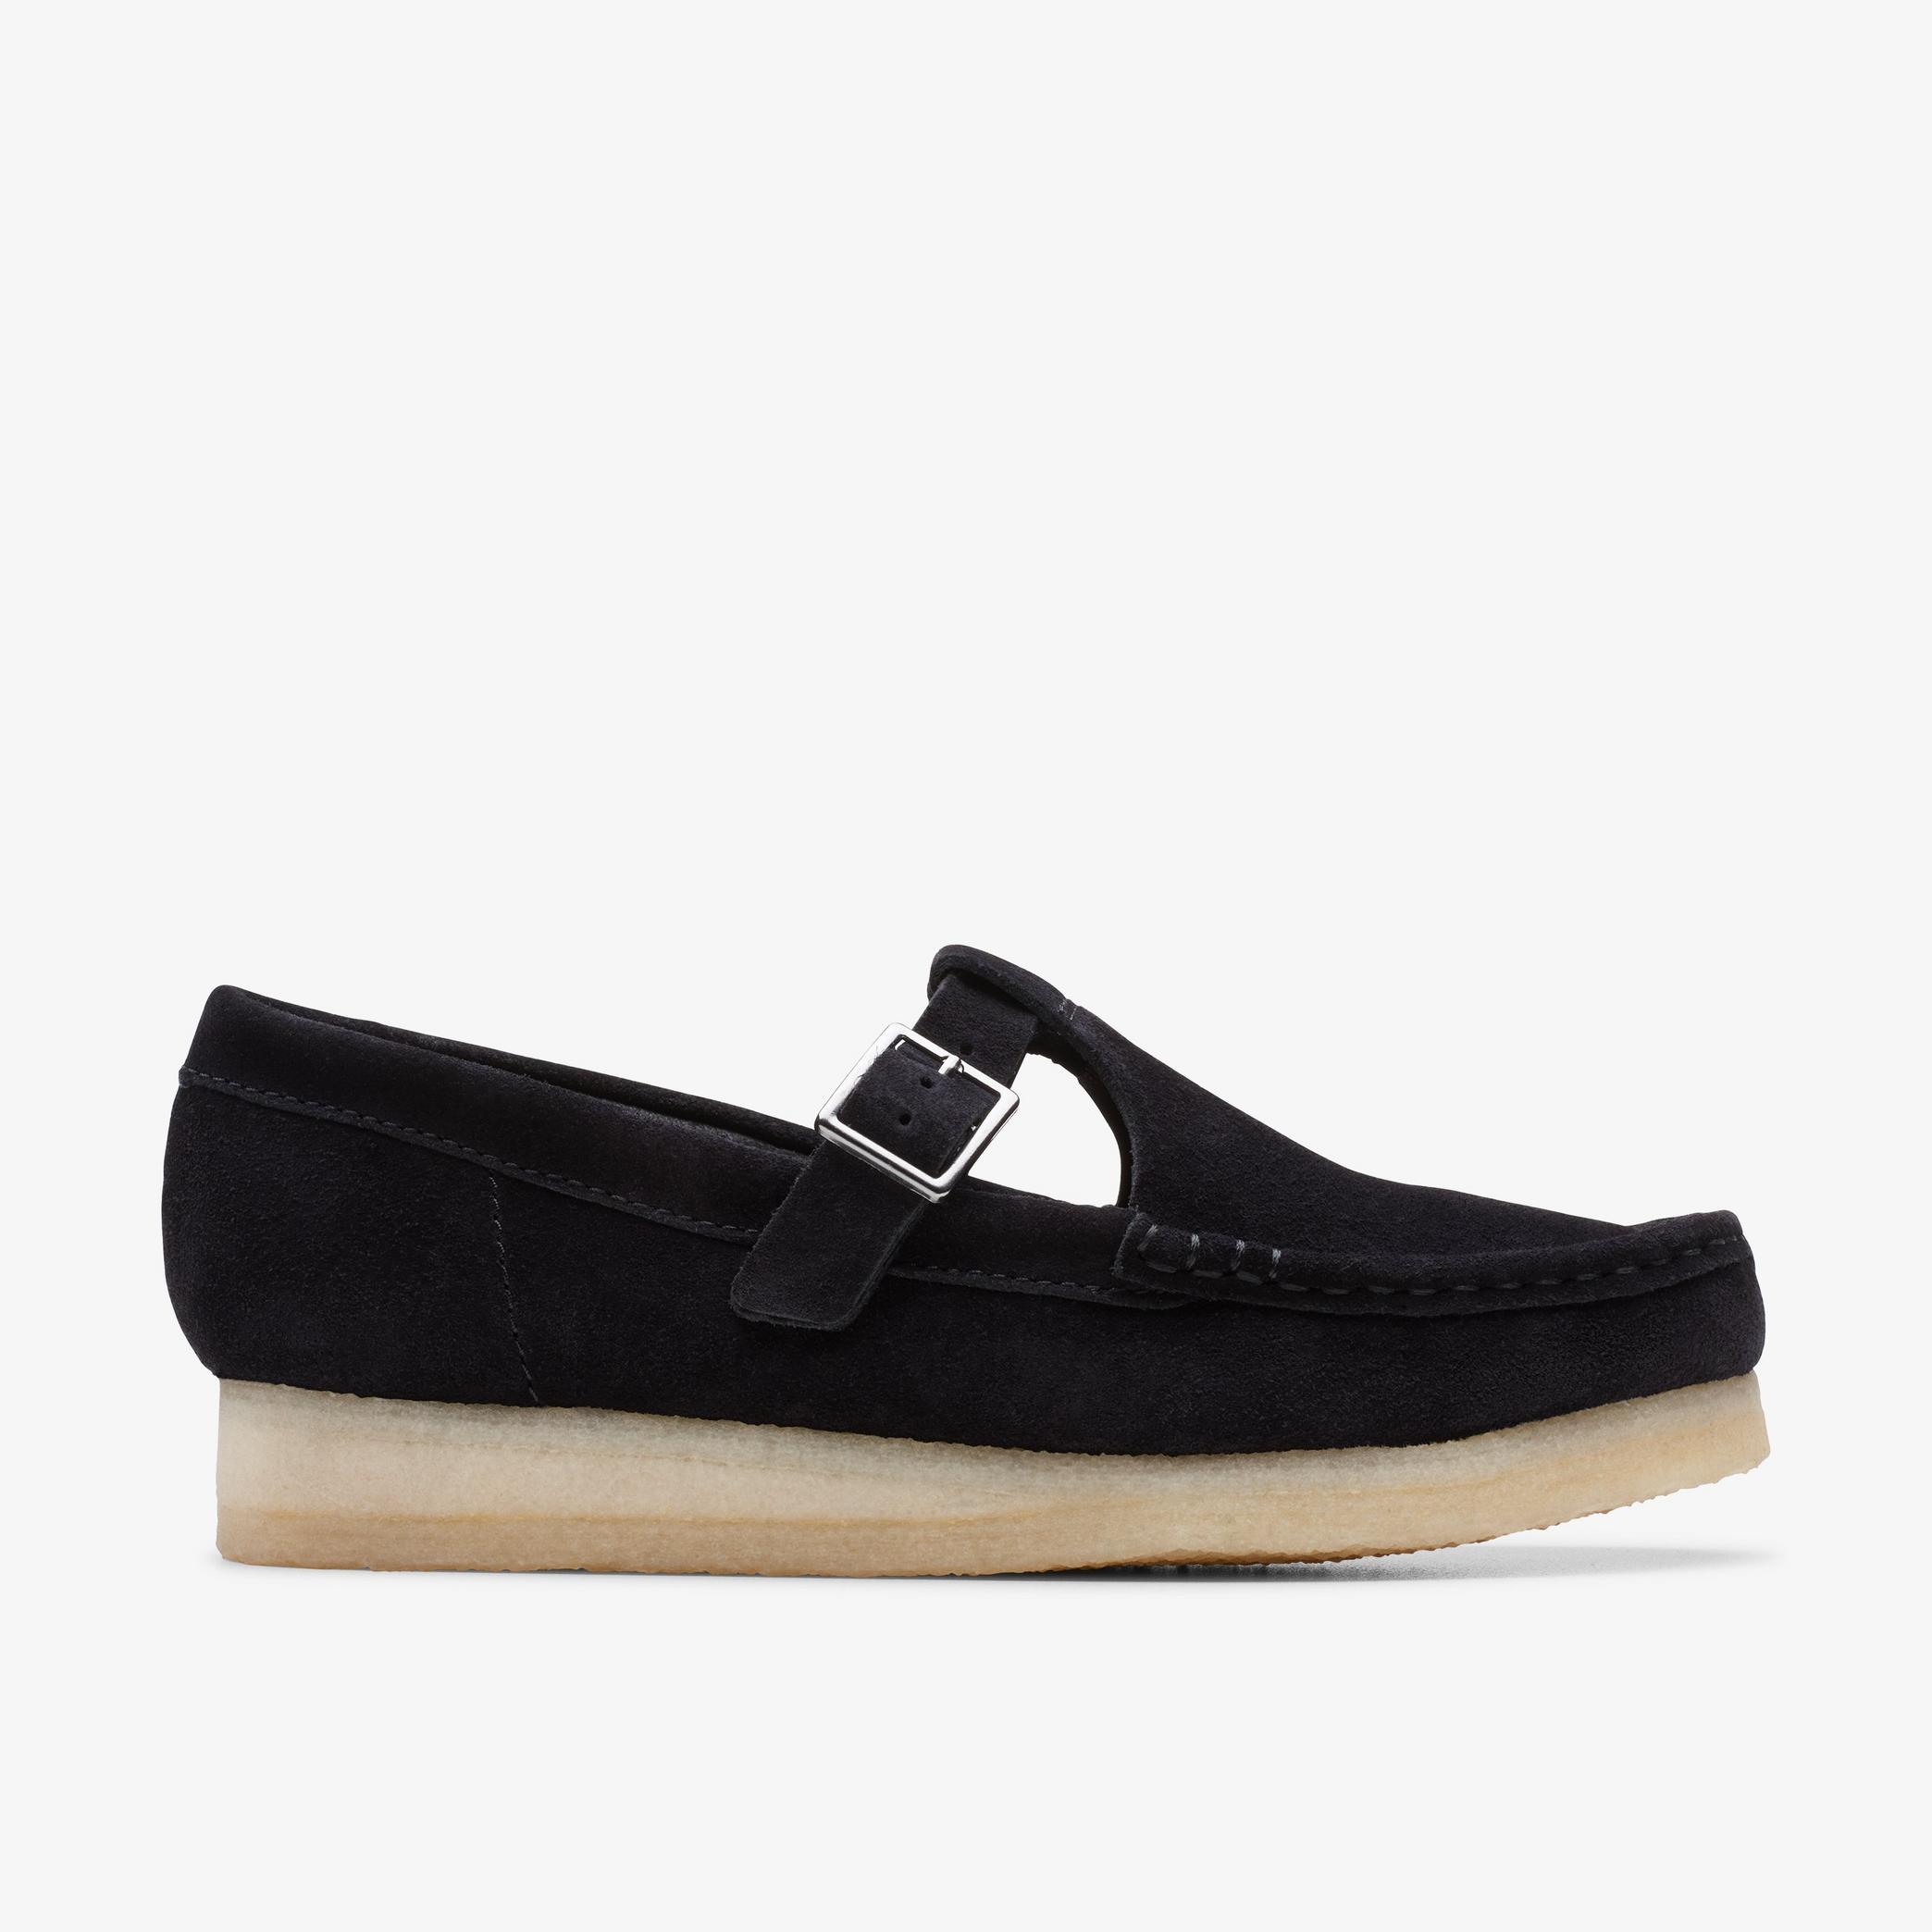 Wallabee T Bar Black Suede Loafers, view 1 of 6